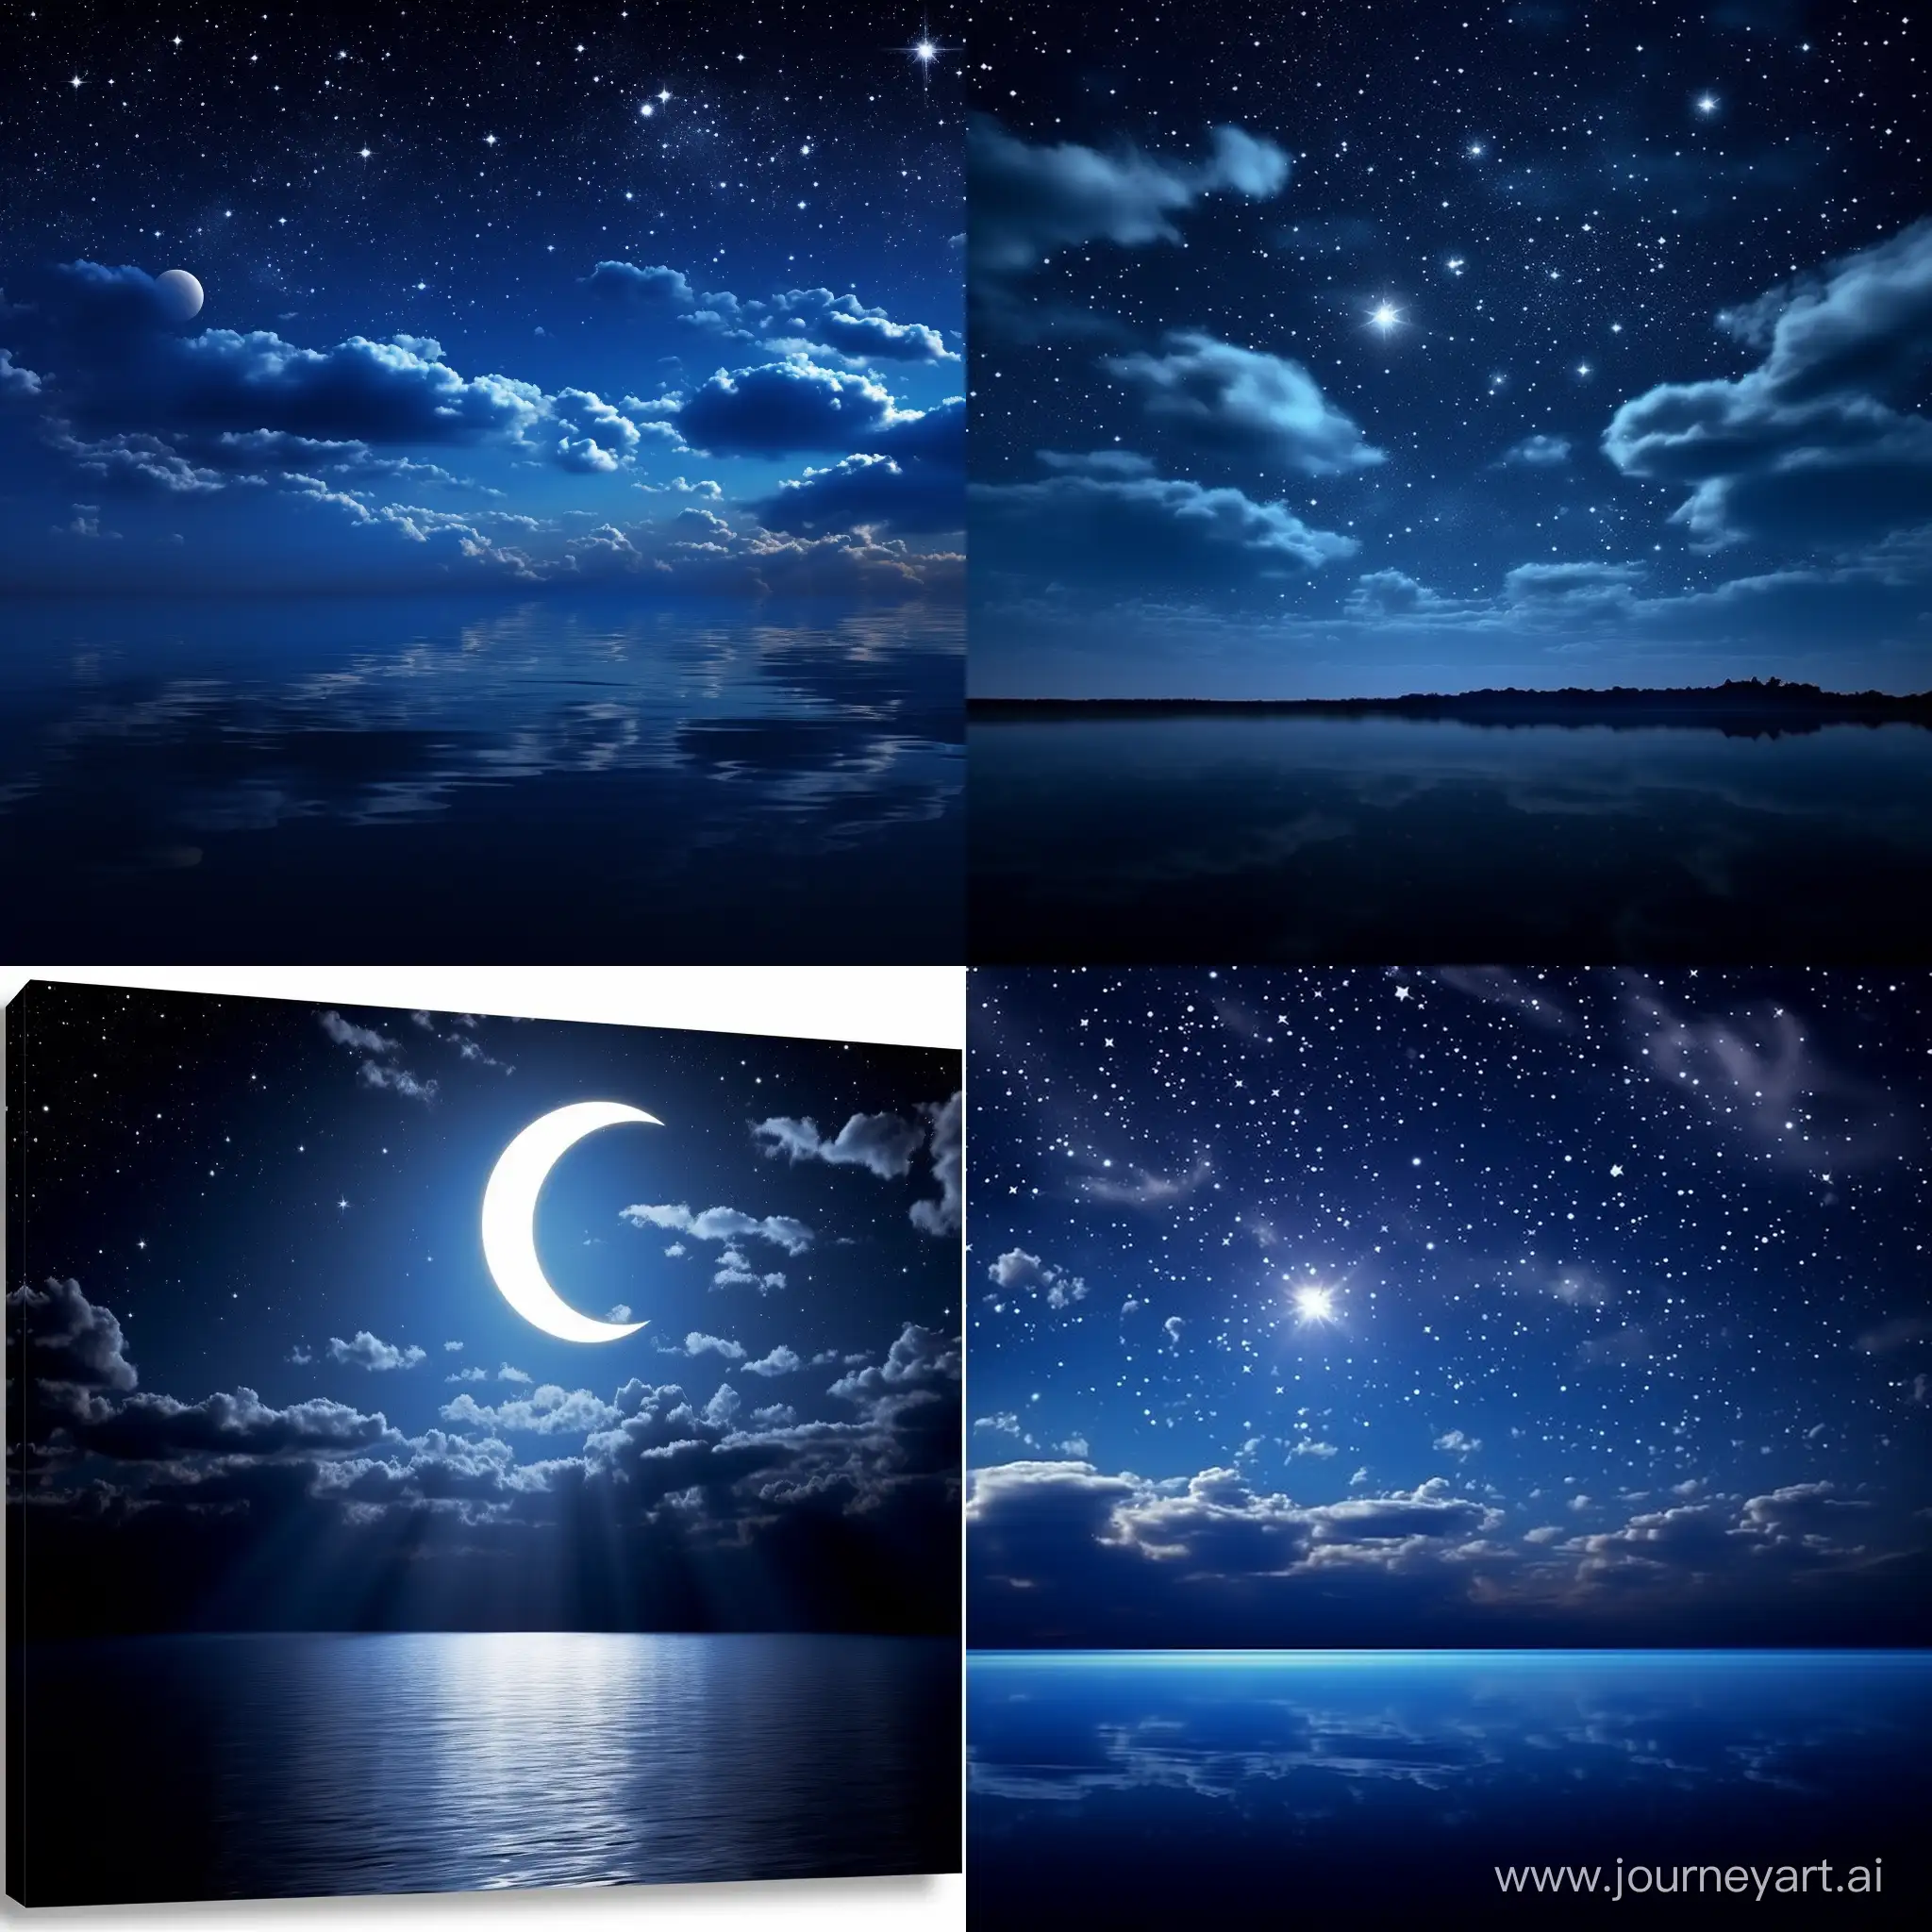 The navy blue sky enveloped the world like a mysterious veil. In the distance, the crescent-shaped moon, shining within the black canvas, only became discernible with a gentle glow. The deep tones of navy highlighted the twinkle of stars in the sky, while the crescent moon's elegant silhouette shimmered like a pearl on the distant horizon. This scene was a tableau reflecting the tranquil silence of the night and the enigma of nature in the sky. realistic photo,cinematic lighting